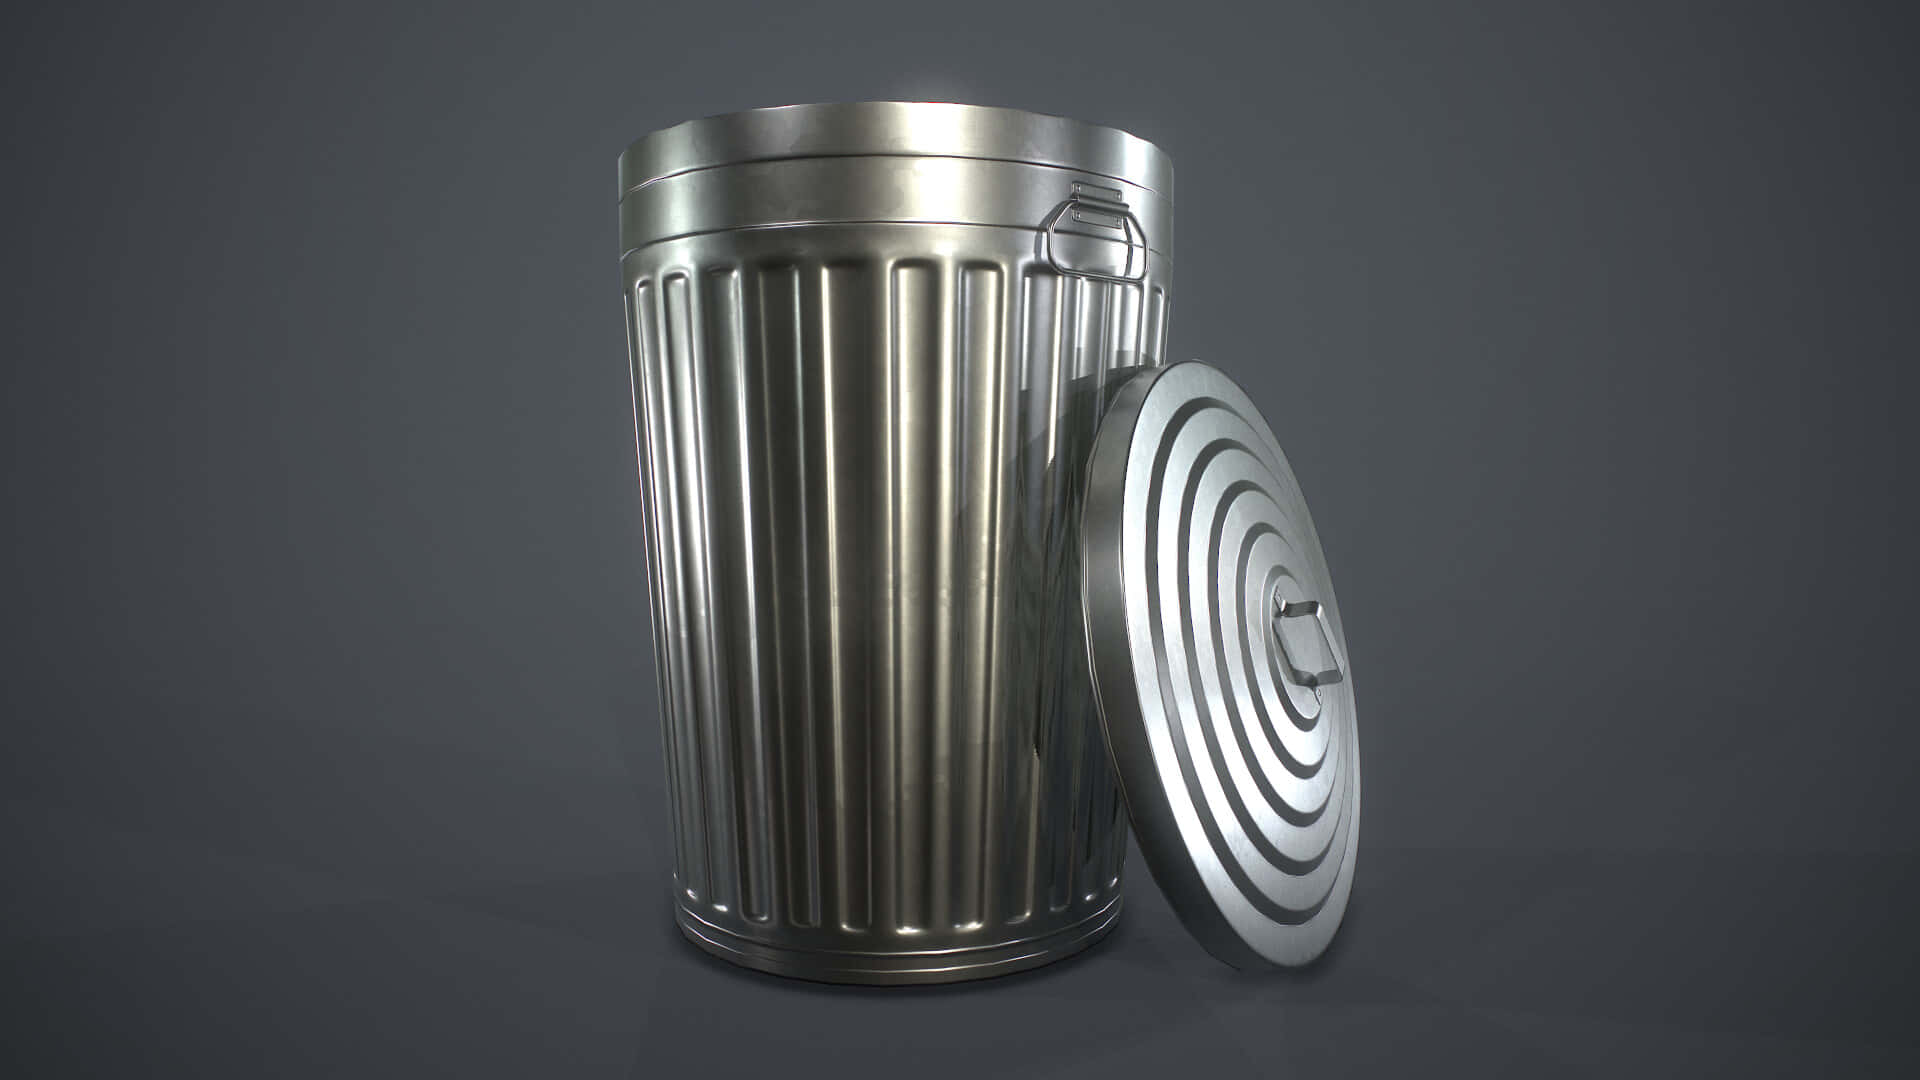 Galvanized Metal Trash Can With Lid Wallpaper